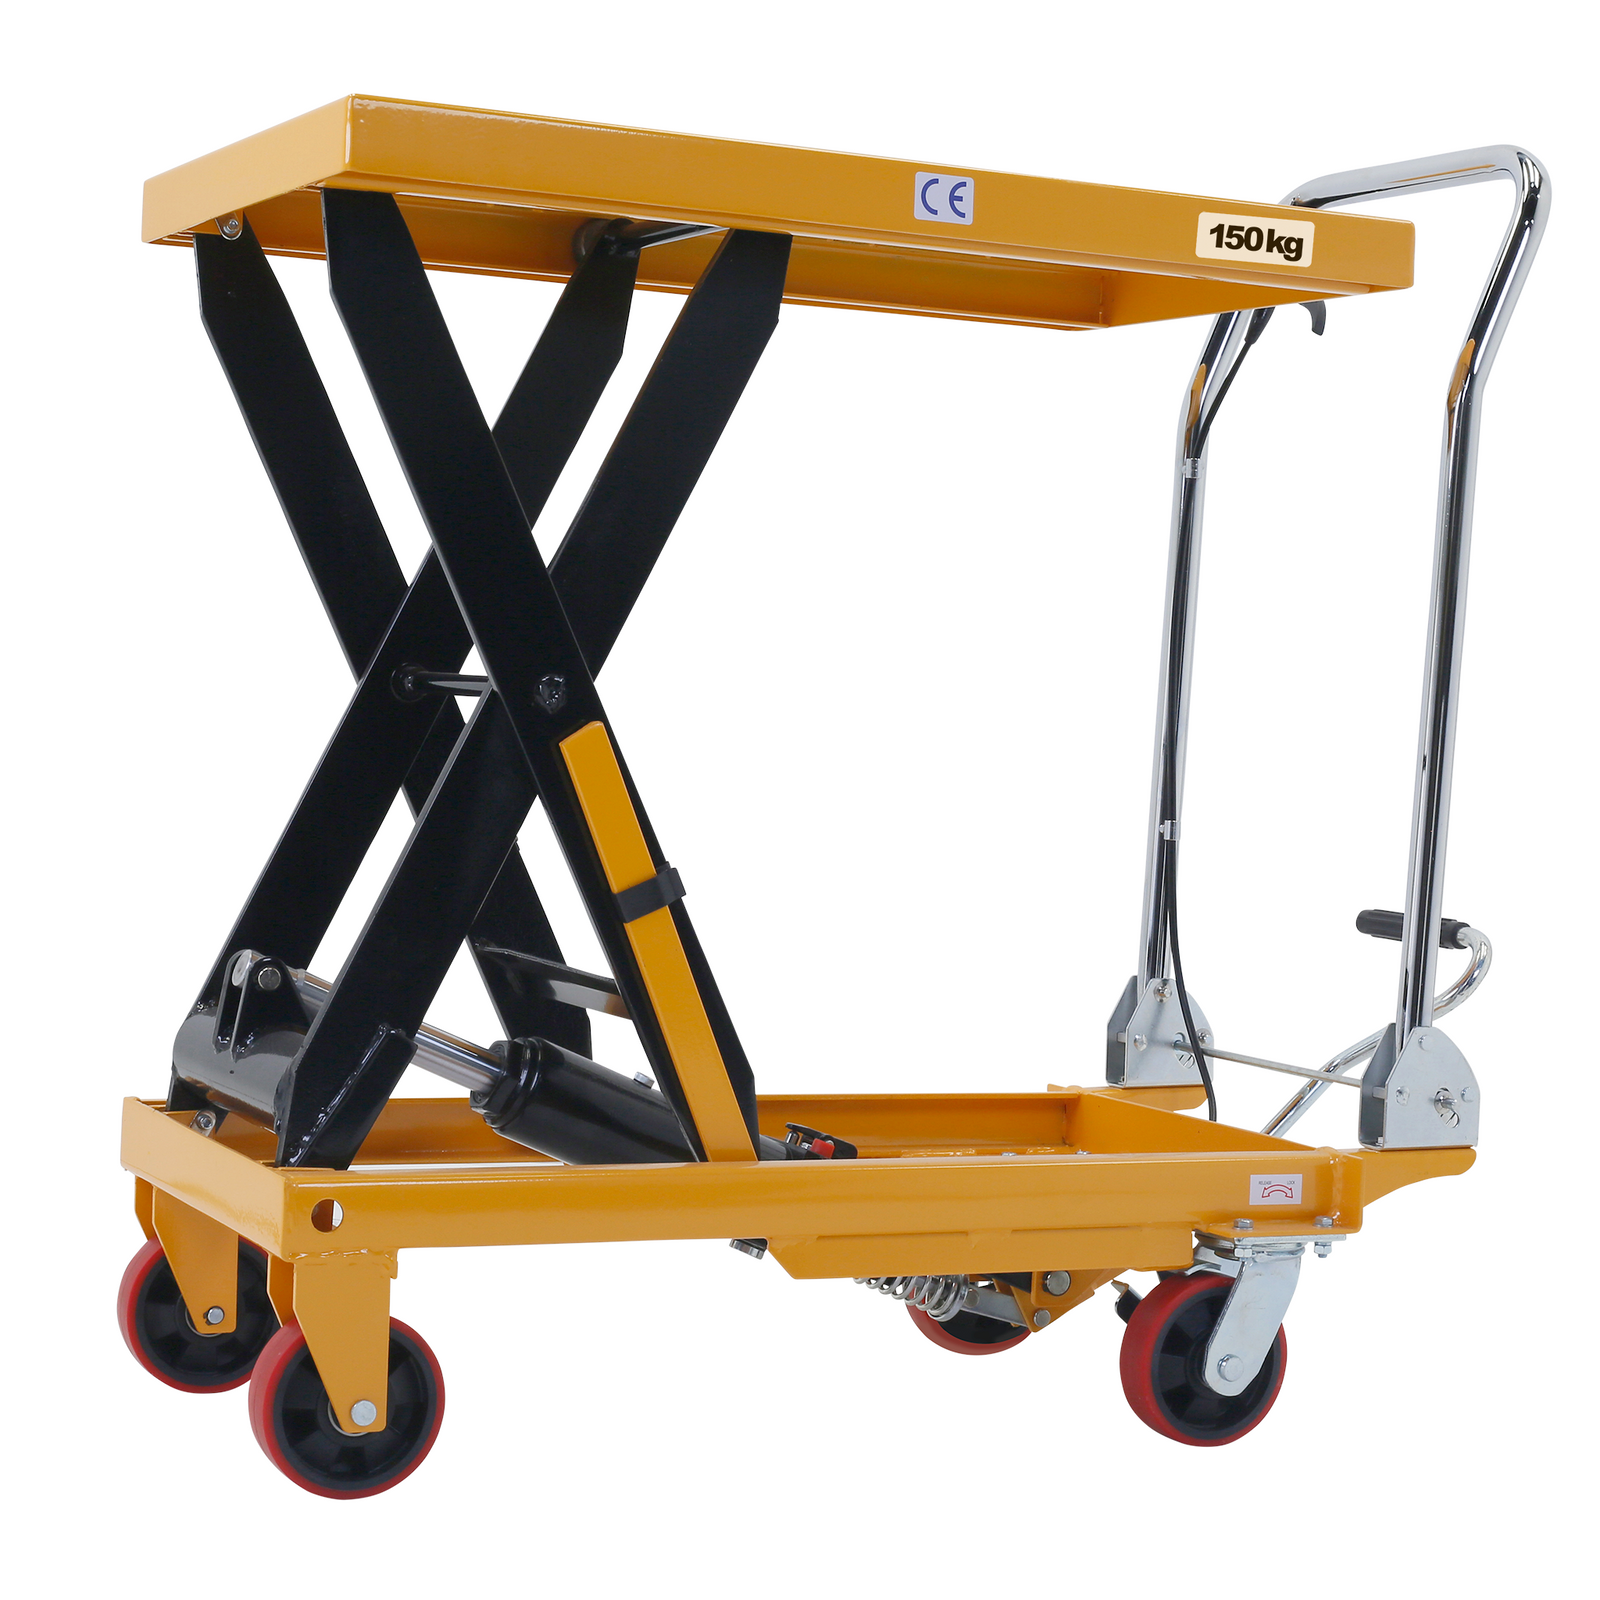 Powerful Wholesale hydraulic wire stand To Complete Your Jobs Speedily 